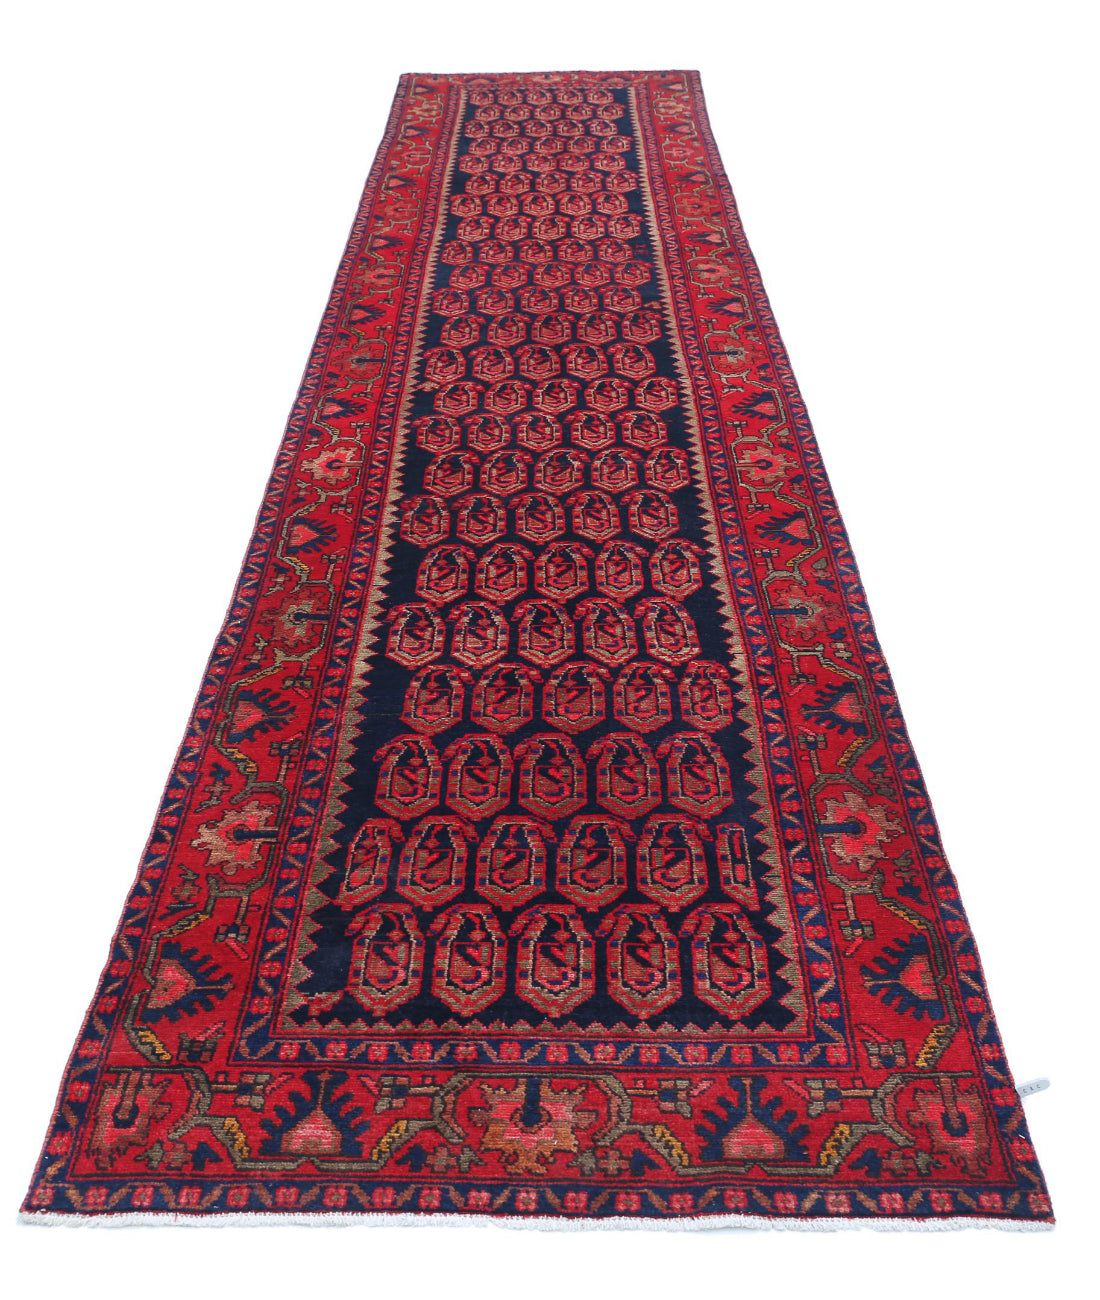 Hand Knotted Persian Hamadan Wool Rug - 3'7'' x 17'4'' 3'7'' x 17'4'' (108 X 520) / Blue / Red